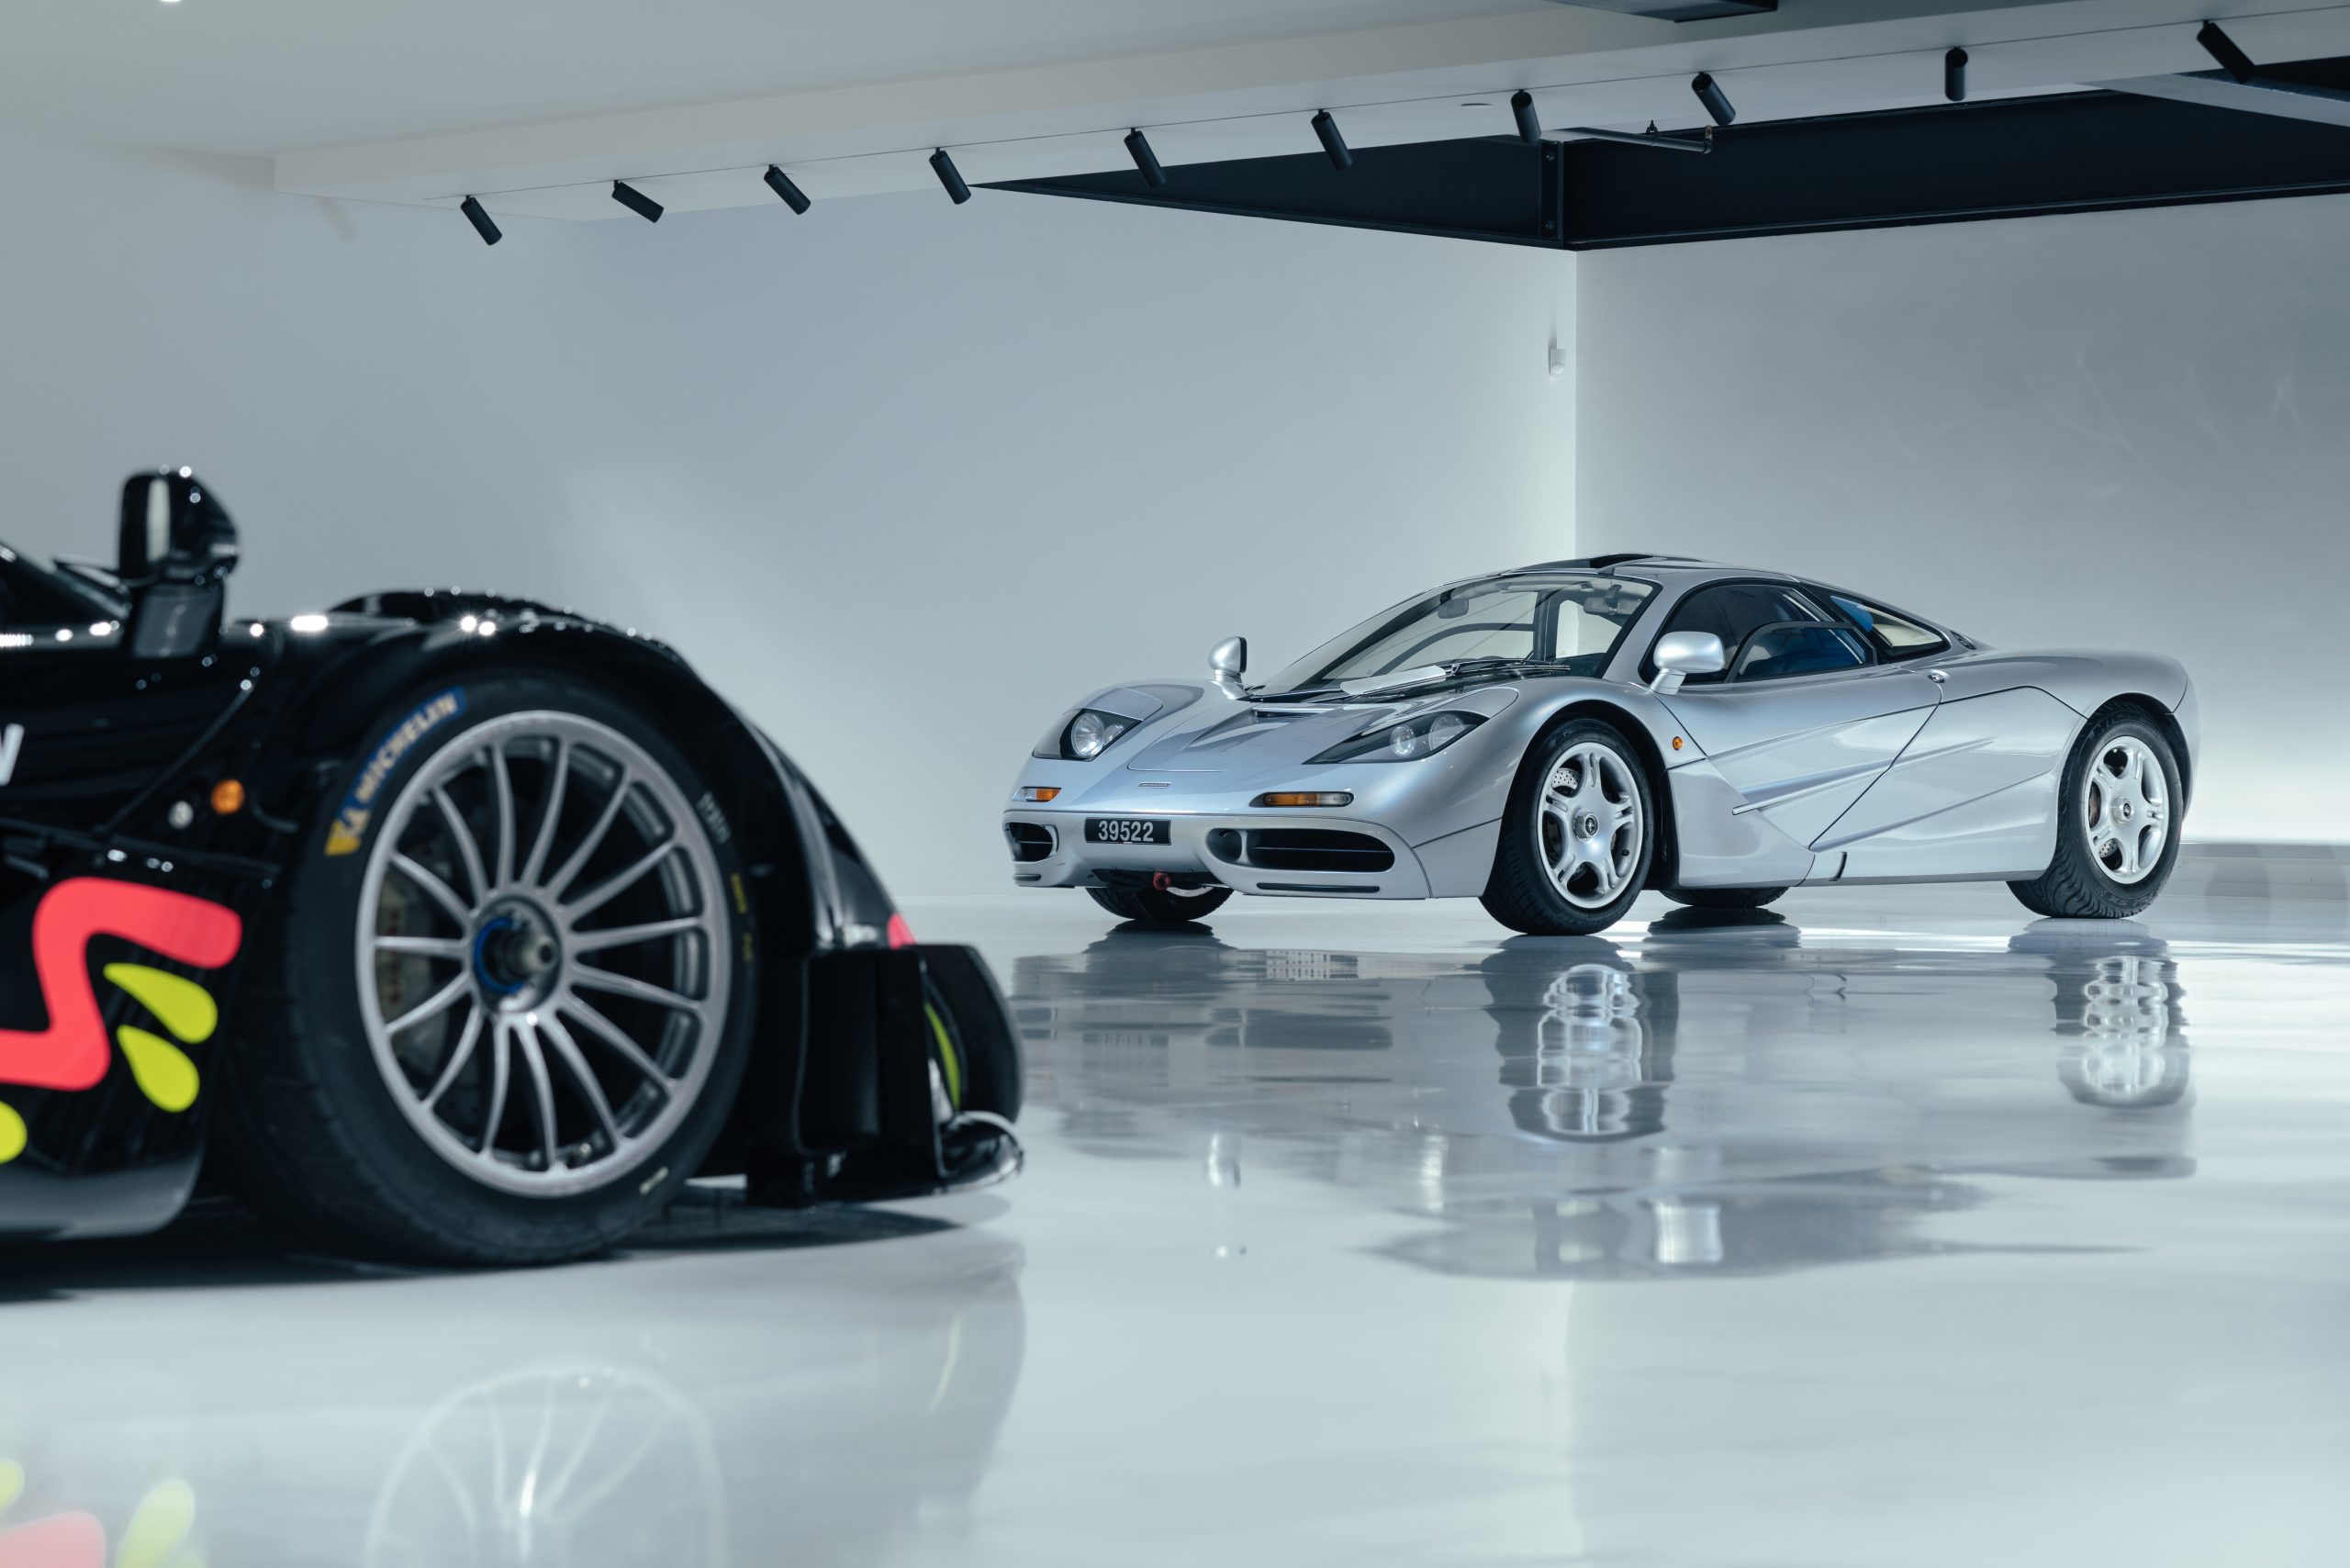 McLaren F1 stories revealed at 30-year celebration event - Magneto